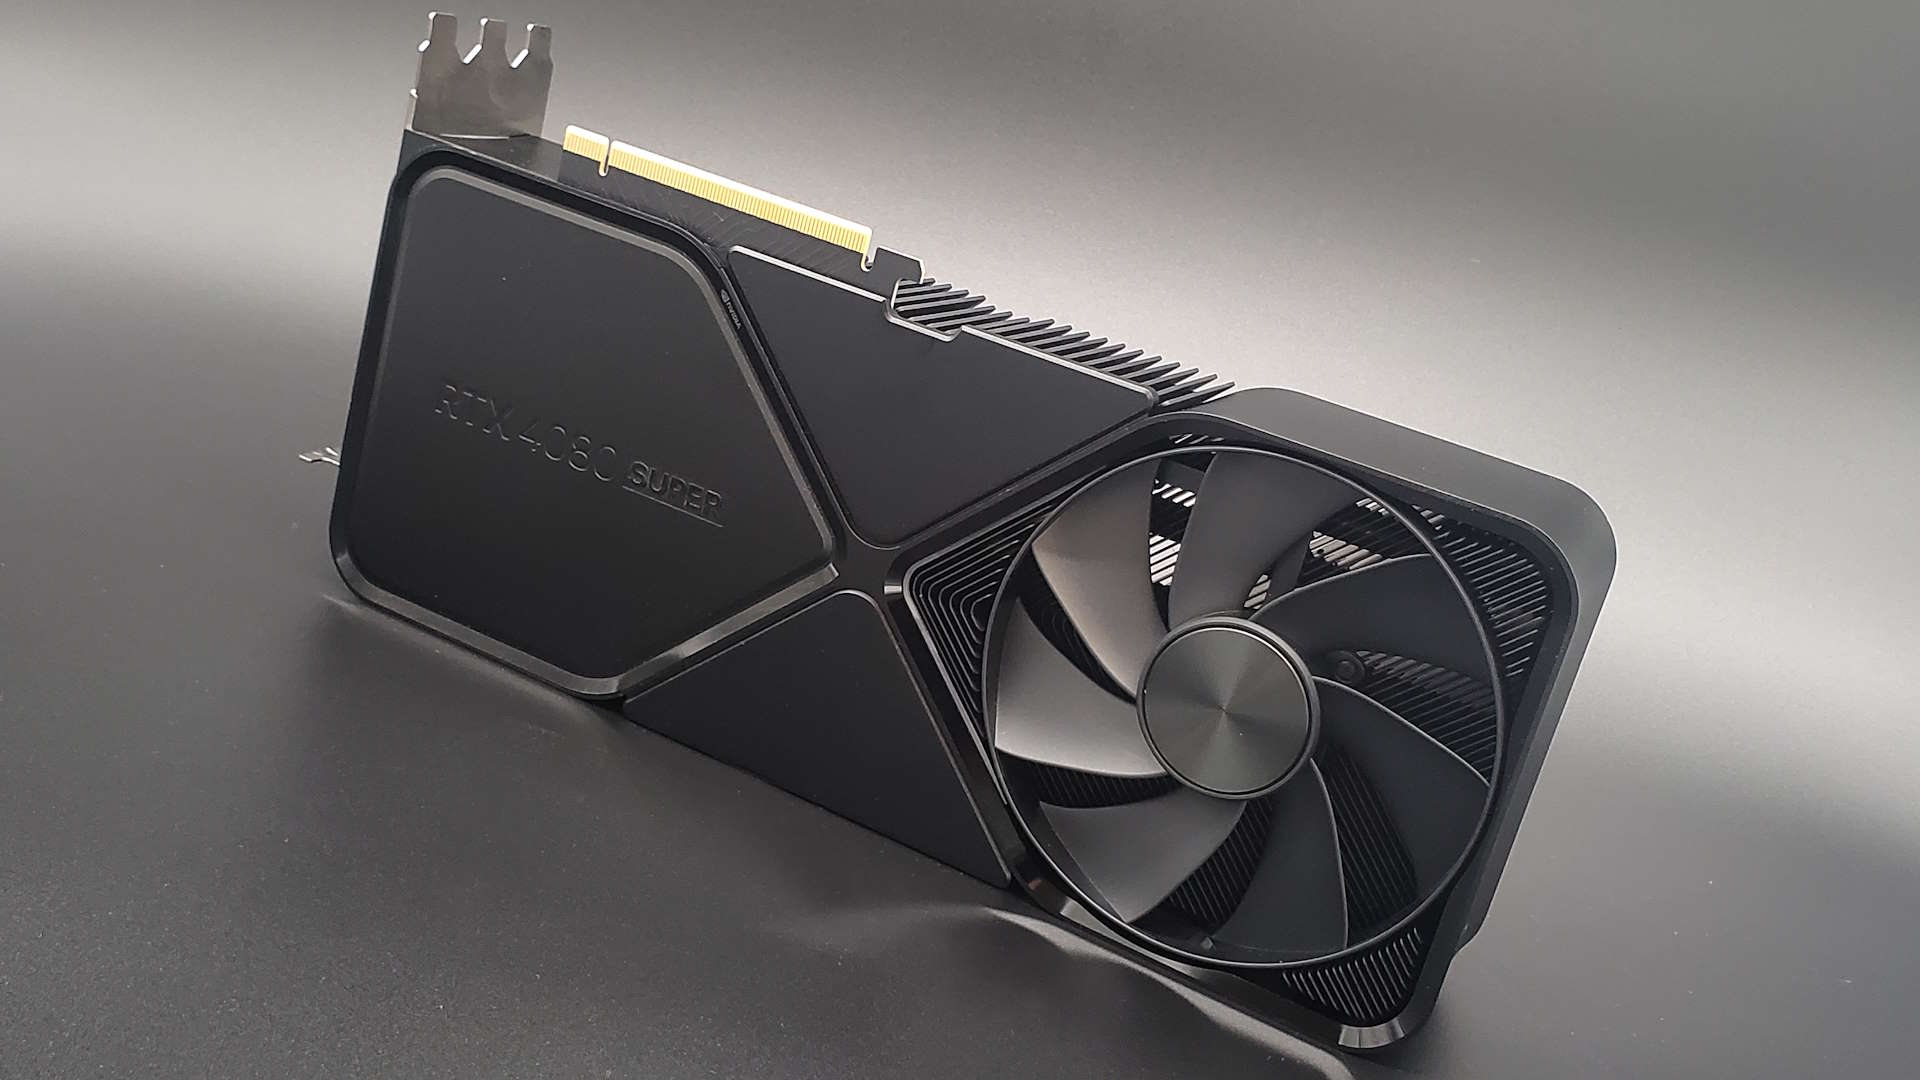 Nvidia RTX 4080 Super Founders Edition graphics card